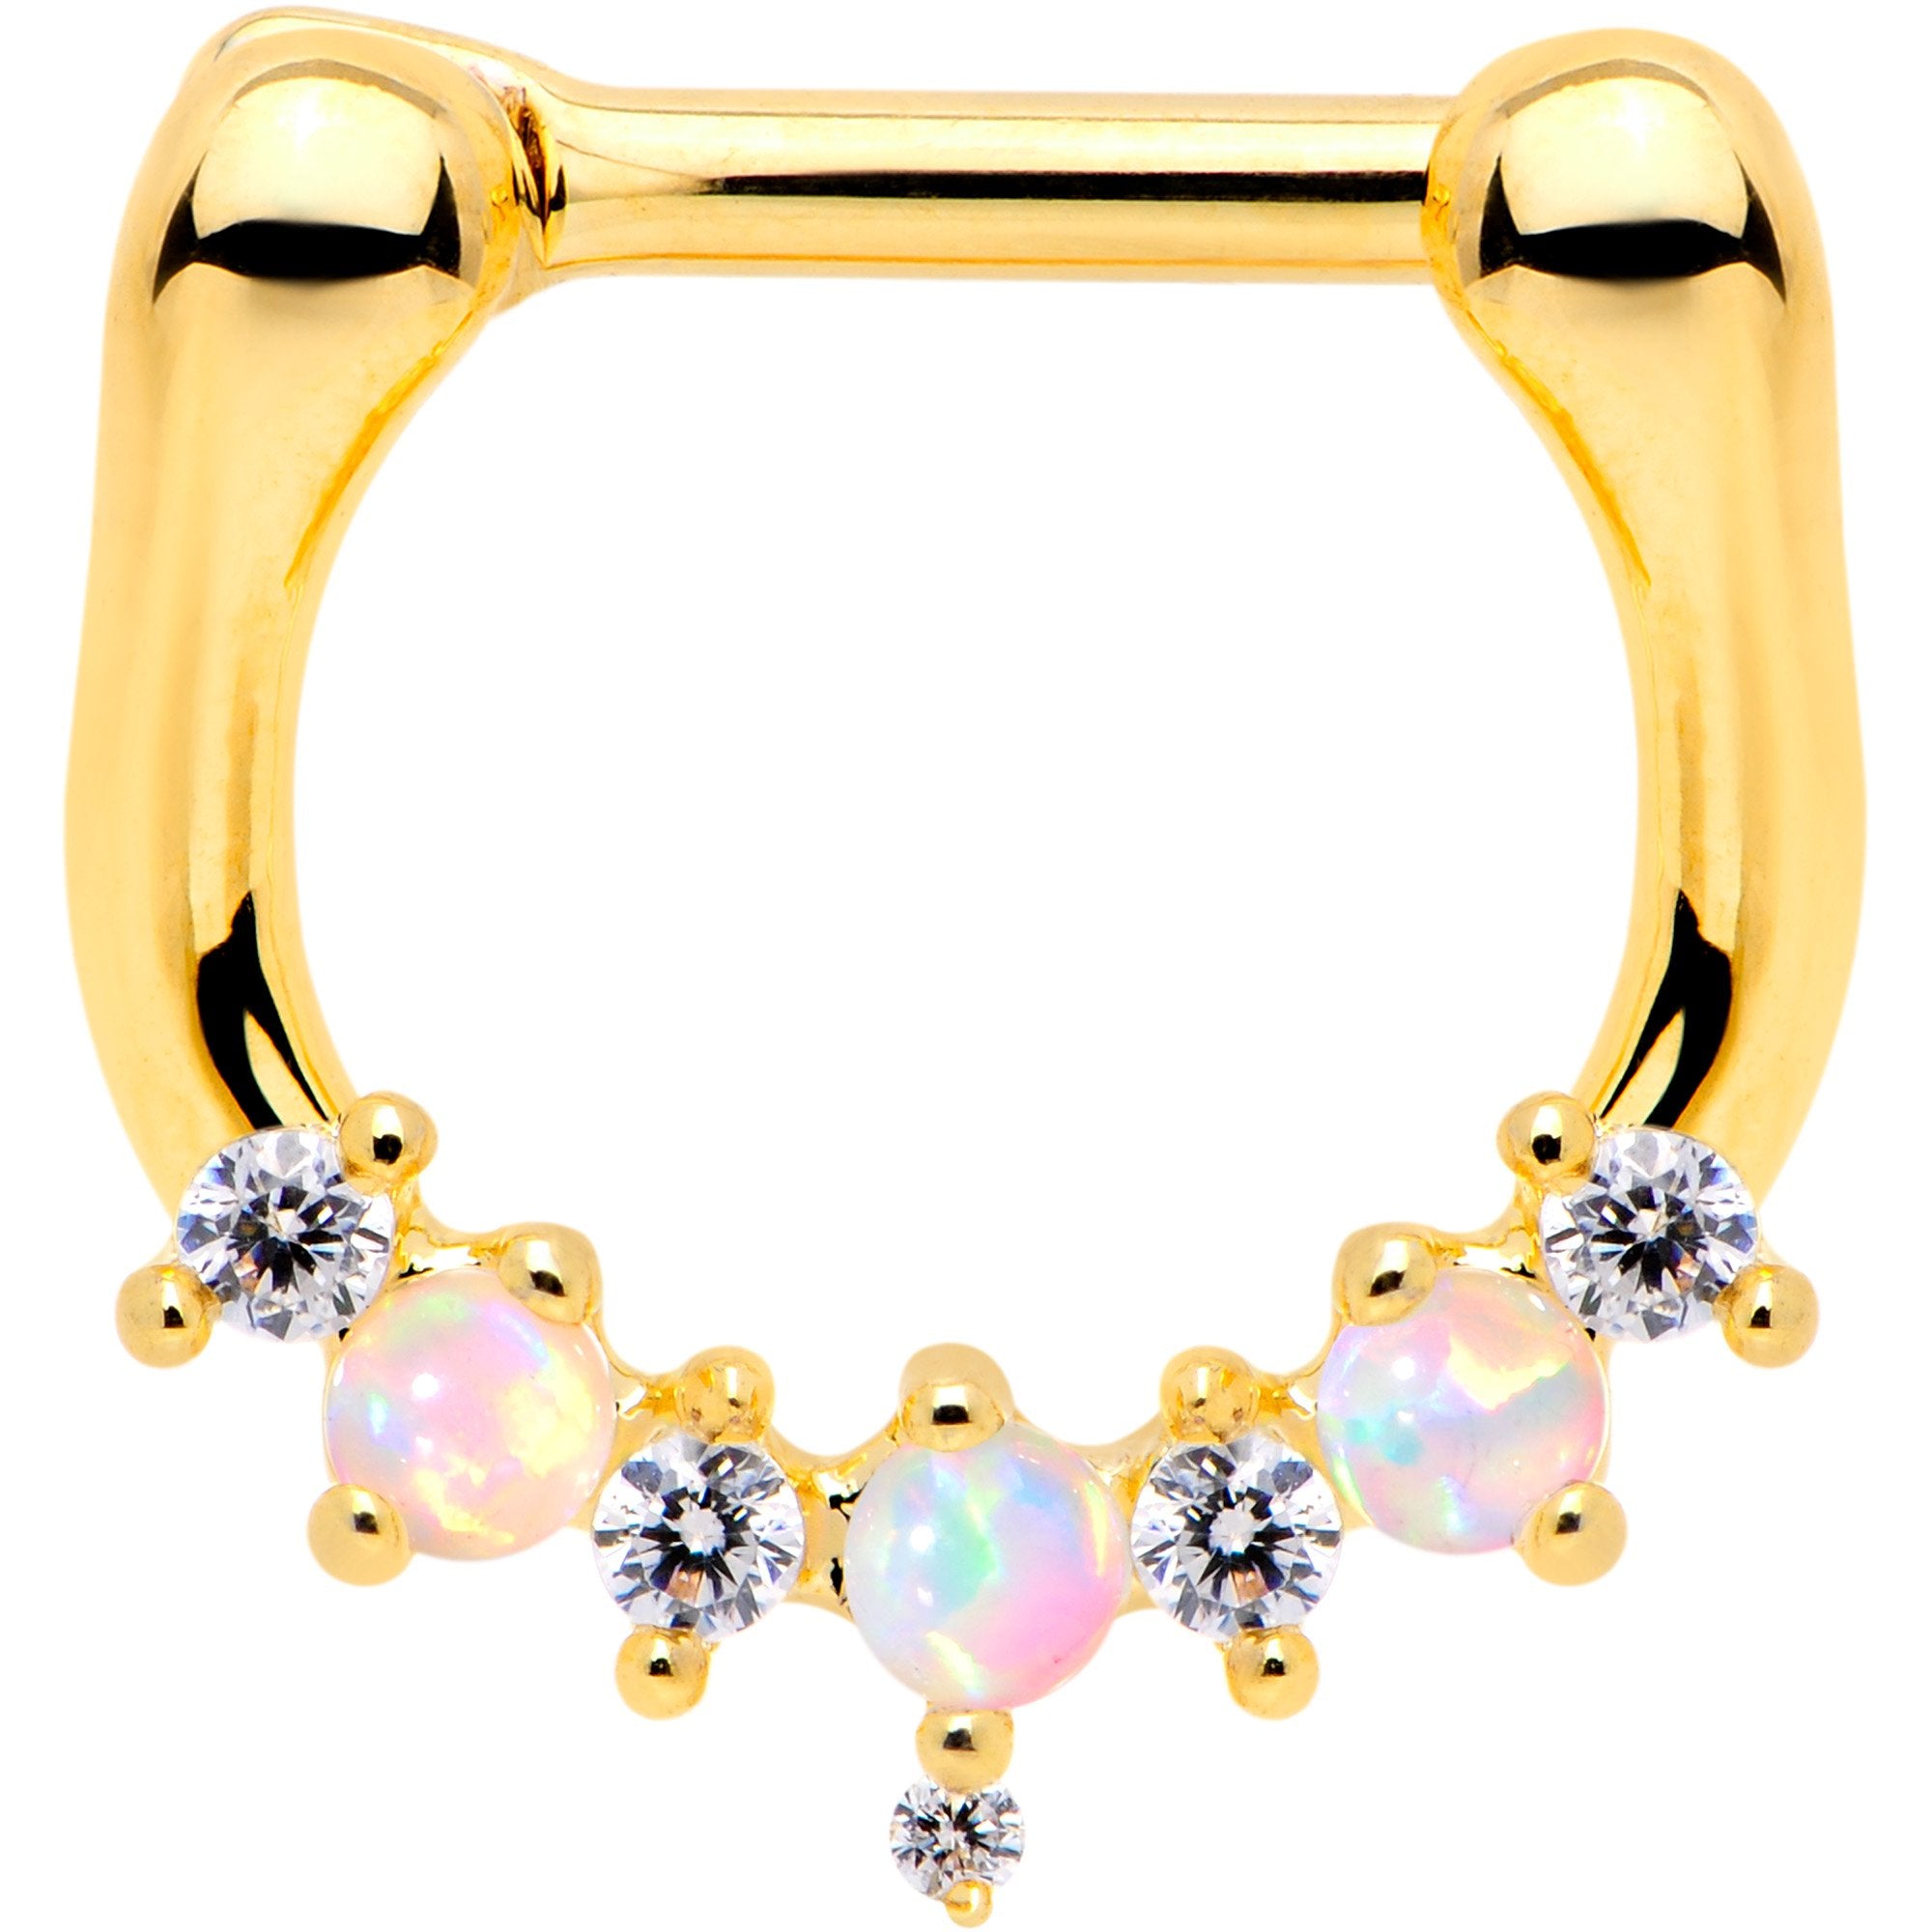 1/4 White Synthetic Opal Gold Tone Plated Flash Septum Clicker